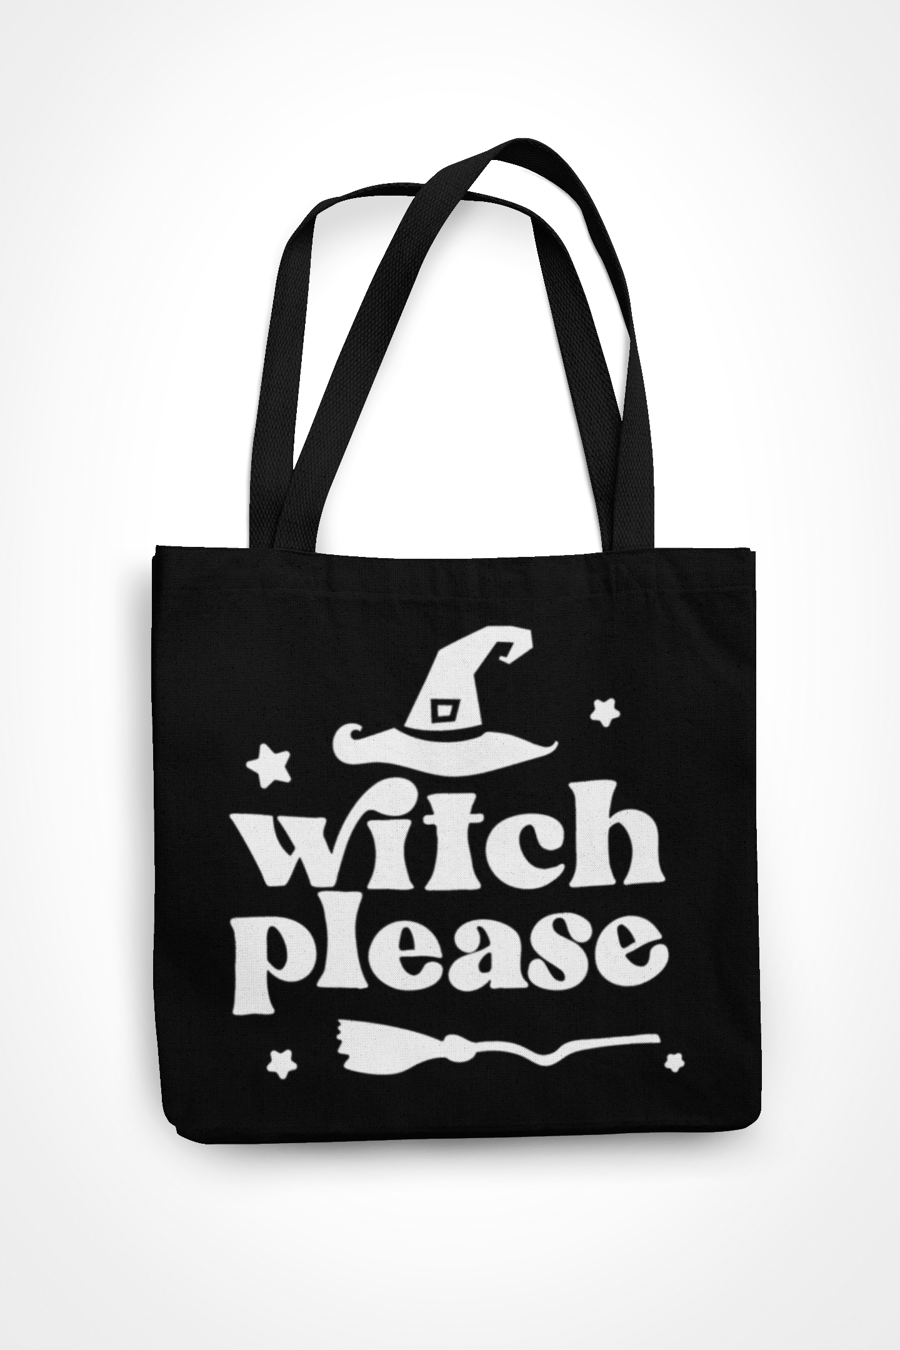 Witch Please Tote Bag- Novelty Funny Halloween themed Totebag